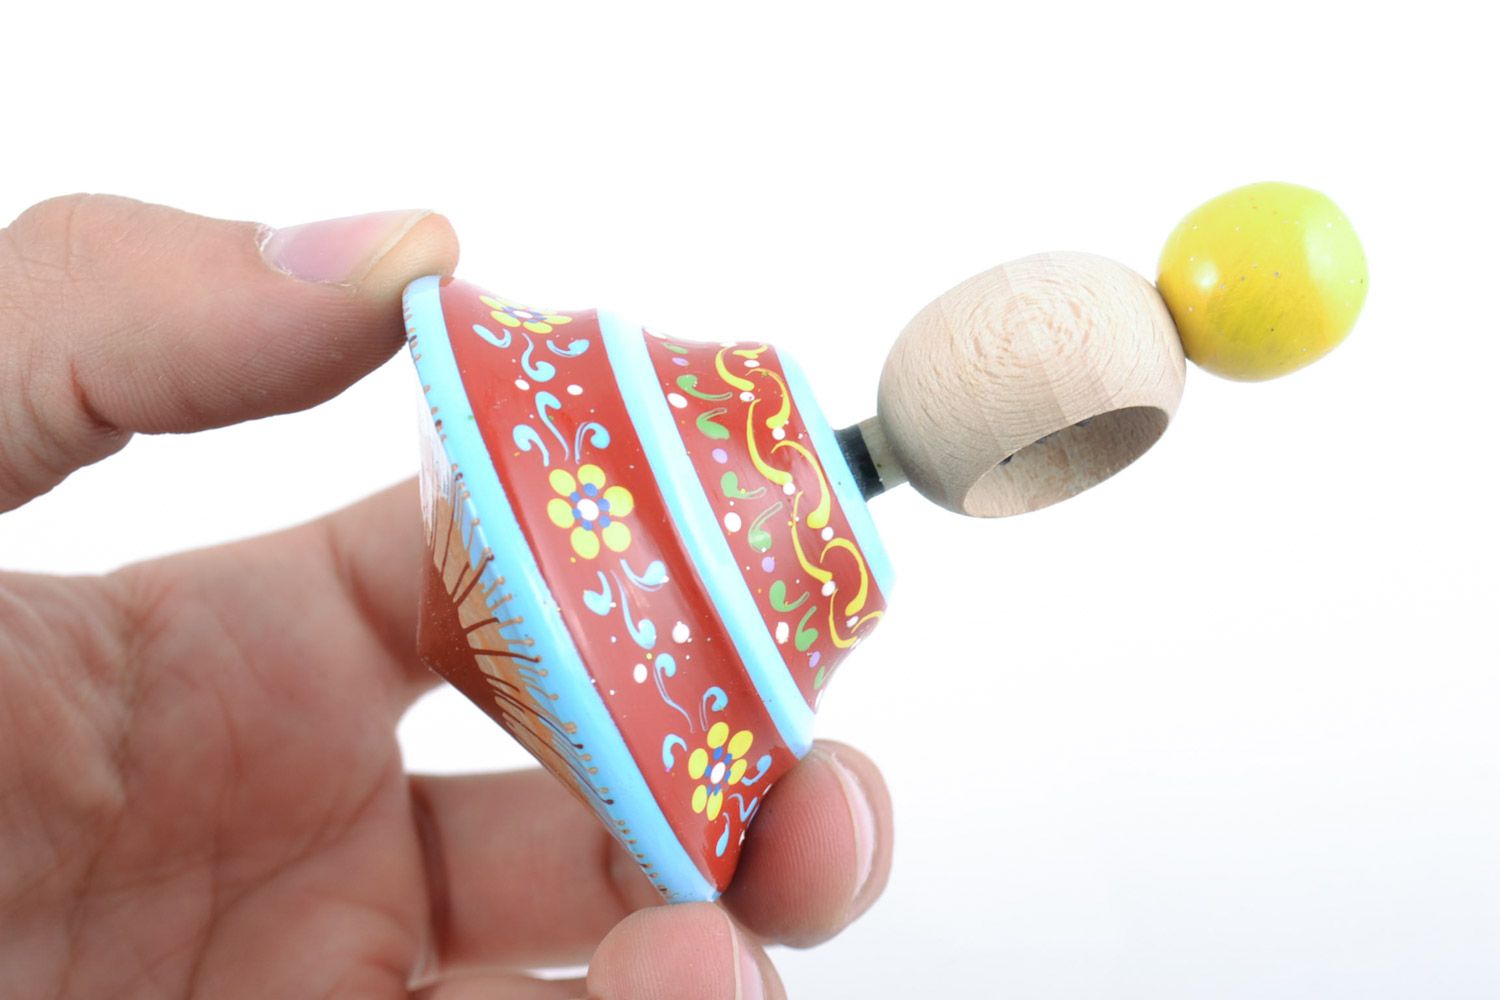 Handmade wooden eco toy spinning top with ring for fine motor skills development photo 2